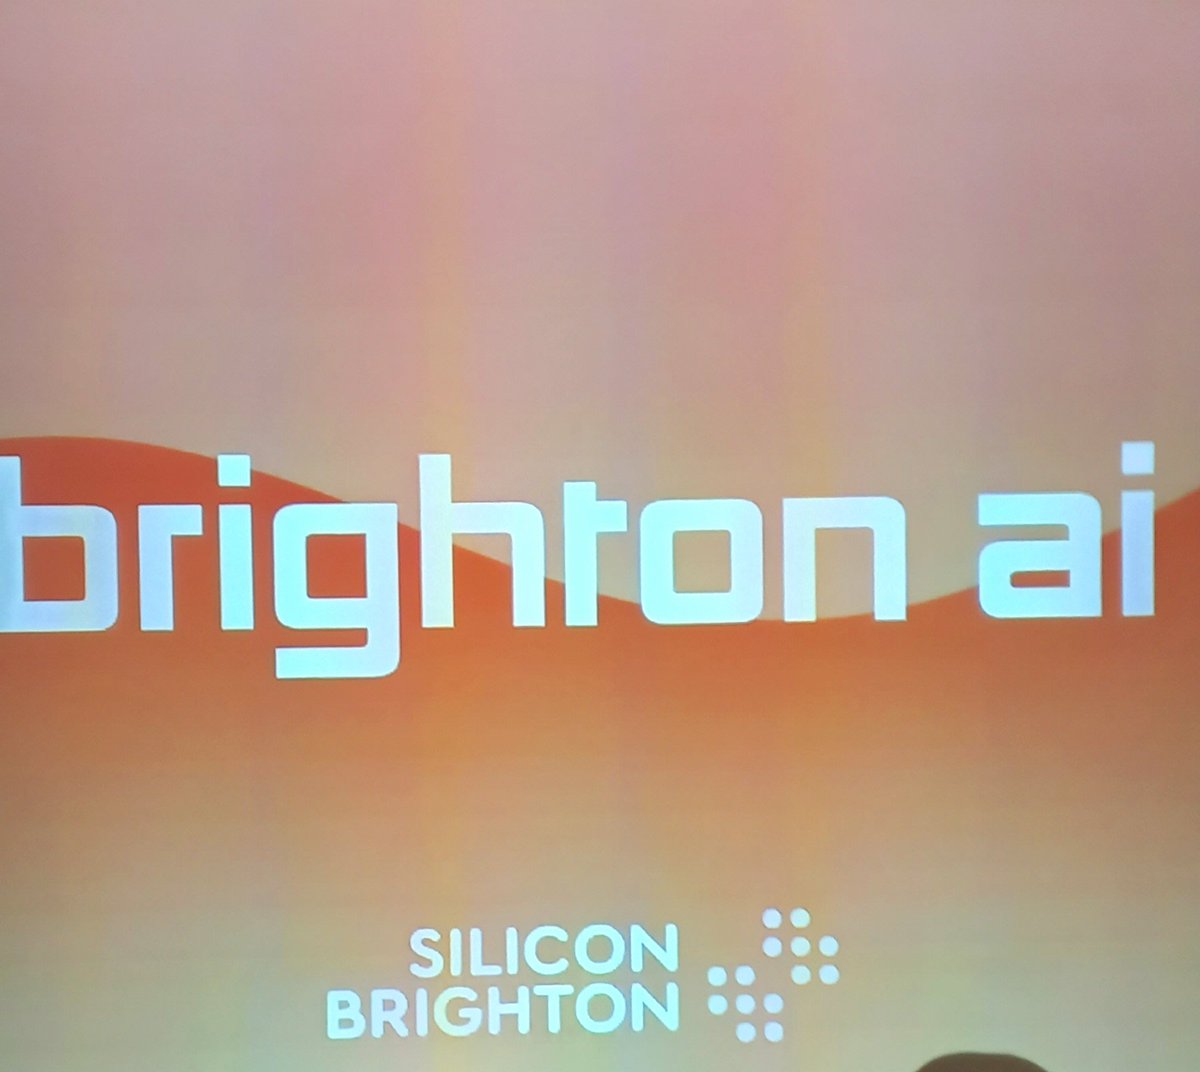 Remember - not all artificial intelligence is intelligent. Launch of #Brighton #AI 'So, engineer yiur dataset' The ethics is on us, if we care enough. @WiredSussex @SiliconBrighton @BrightonHoveCC